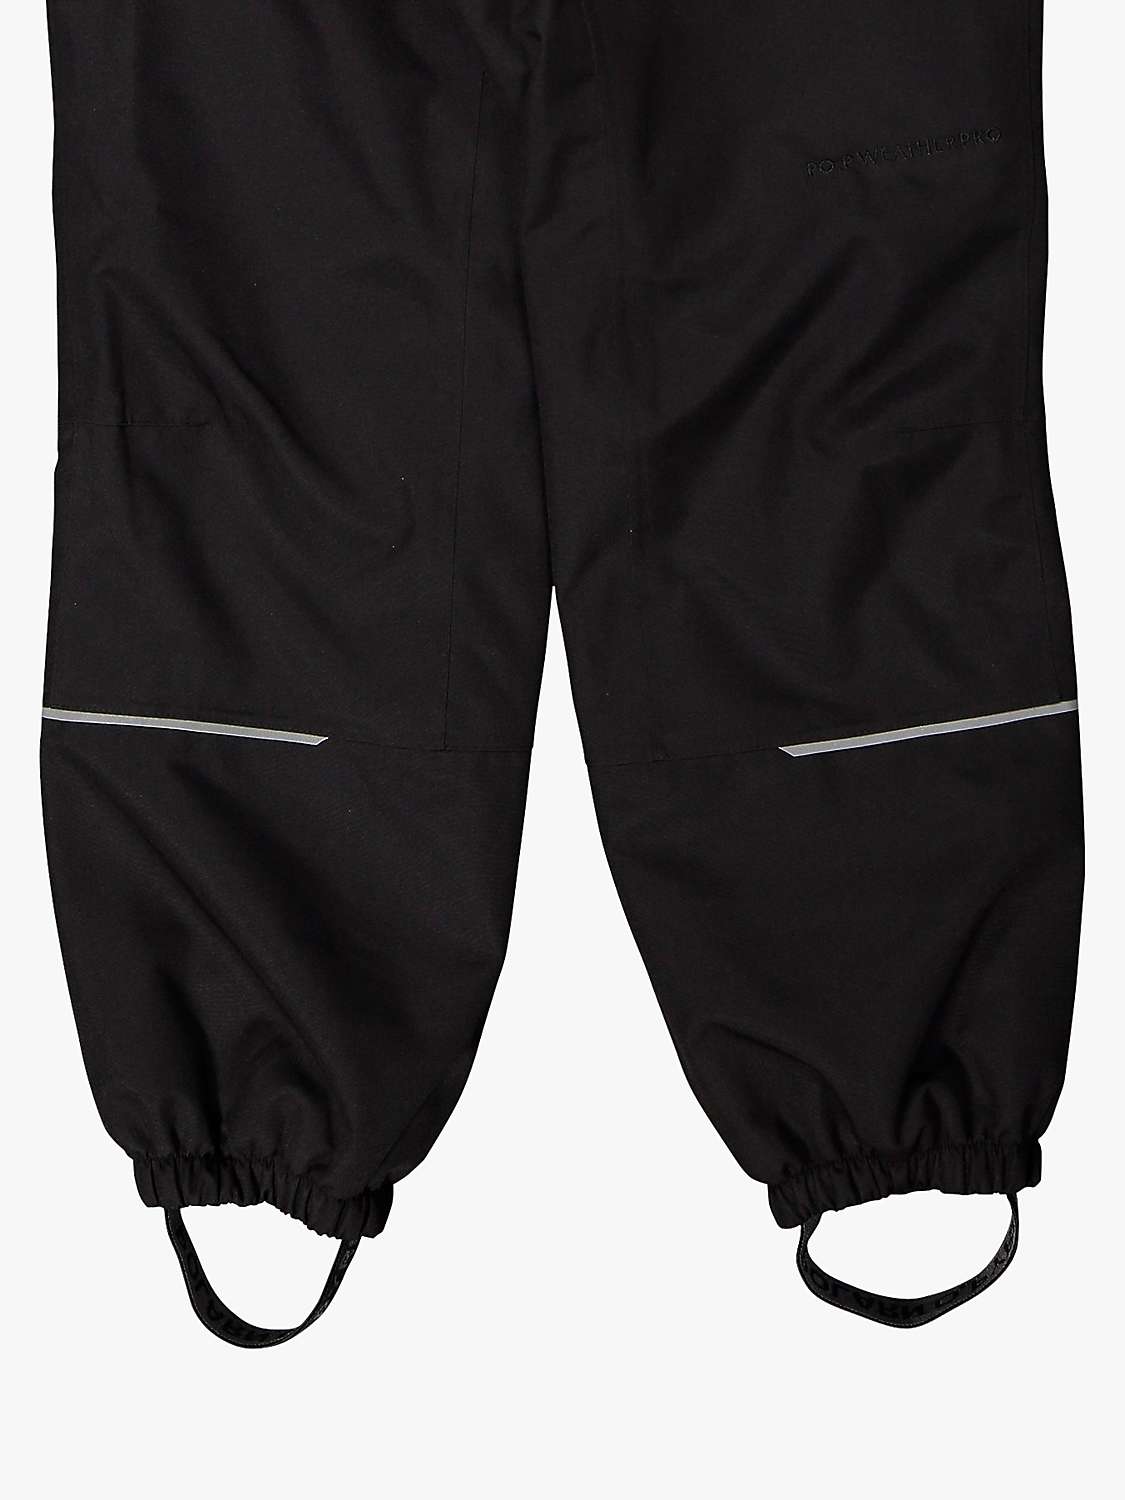 Buy Polarn O. Pyret Kids' Flexi Shell Waterproof Trousers Online at johnlewis.com